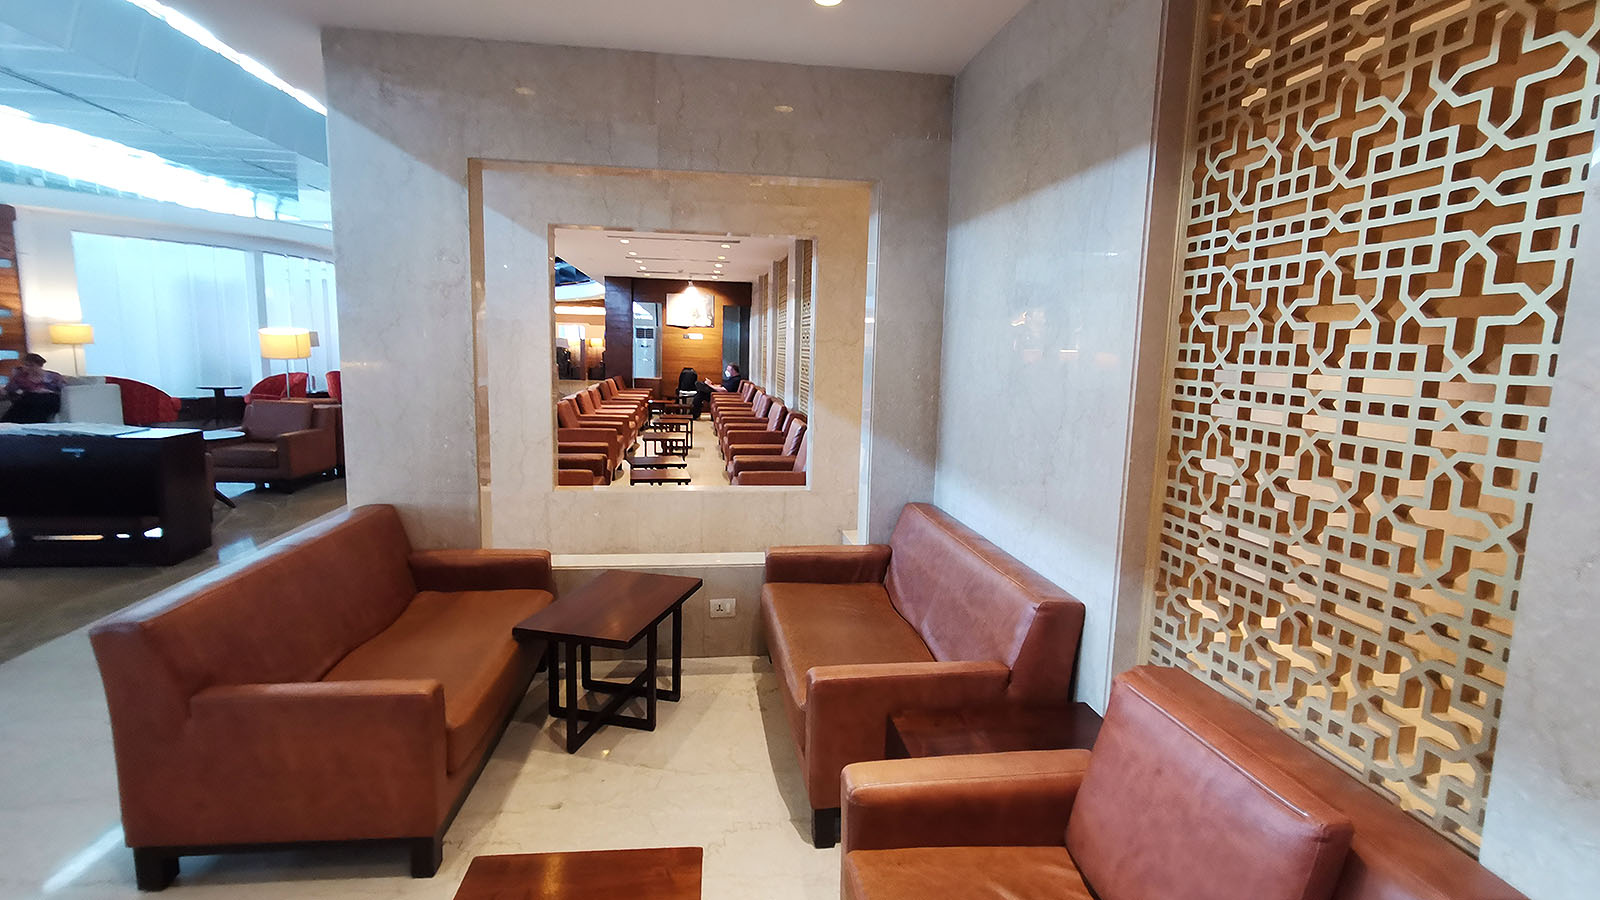 Seating at Air India's Business Class lounge in Delhi